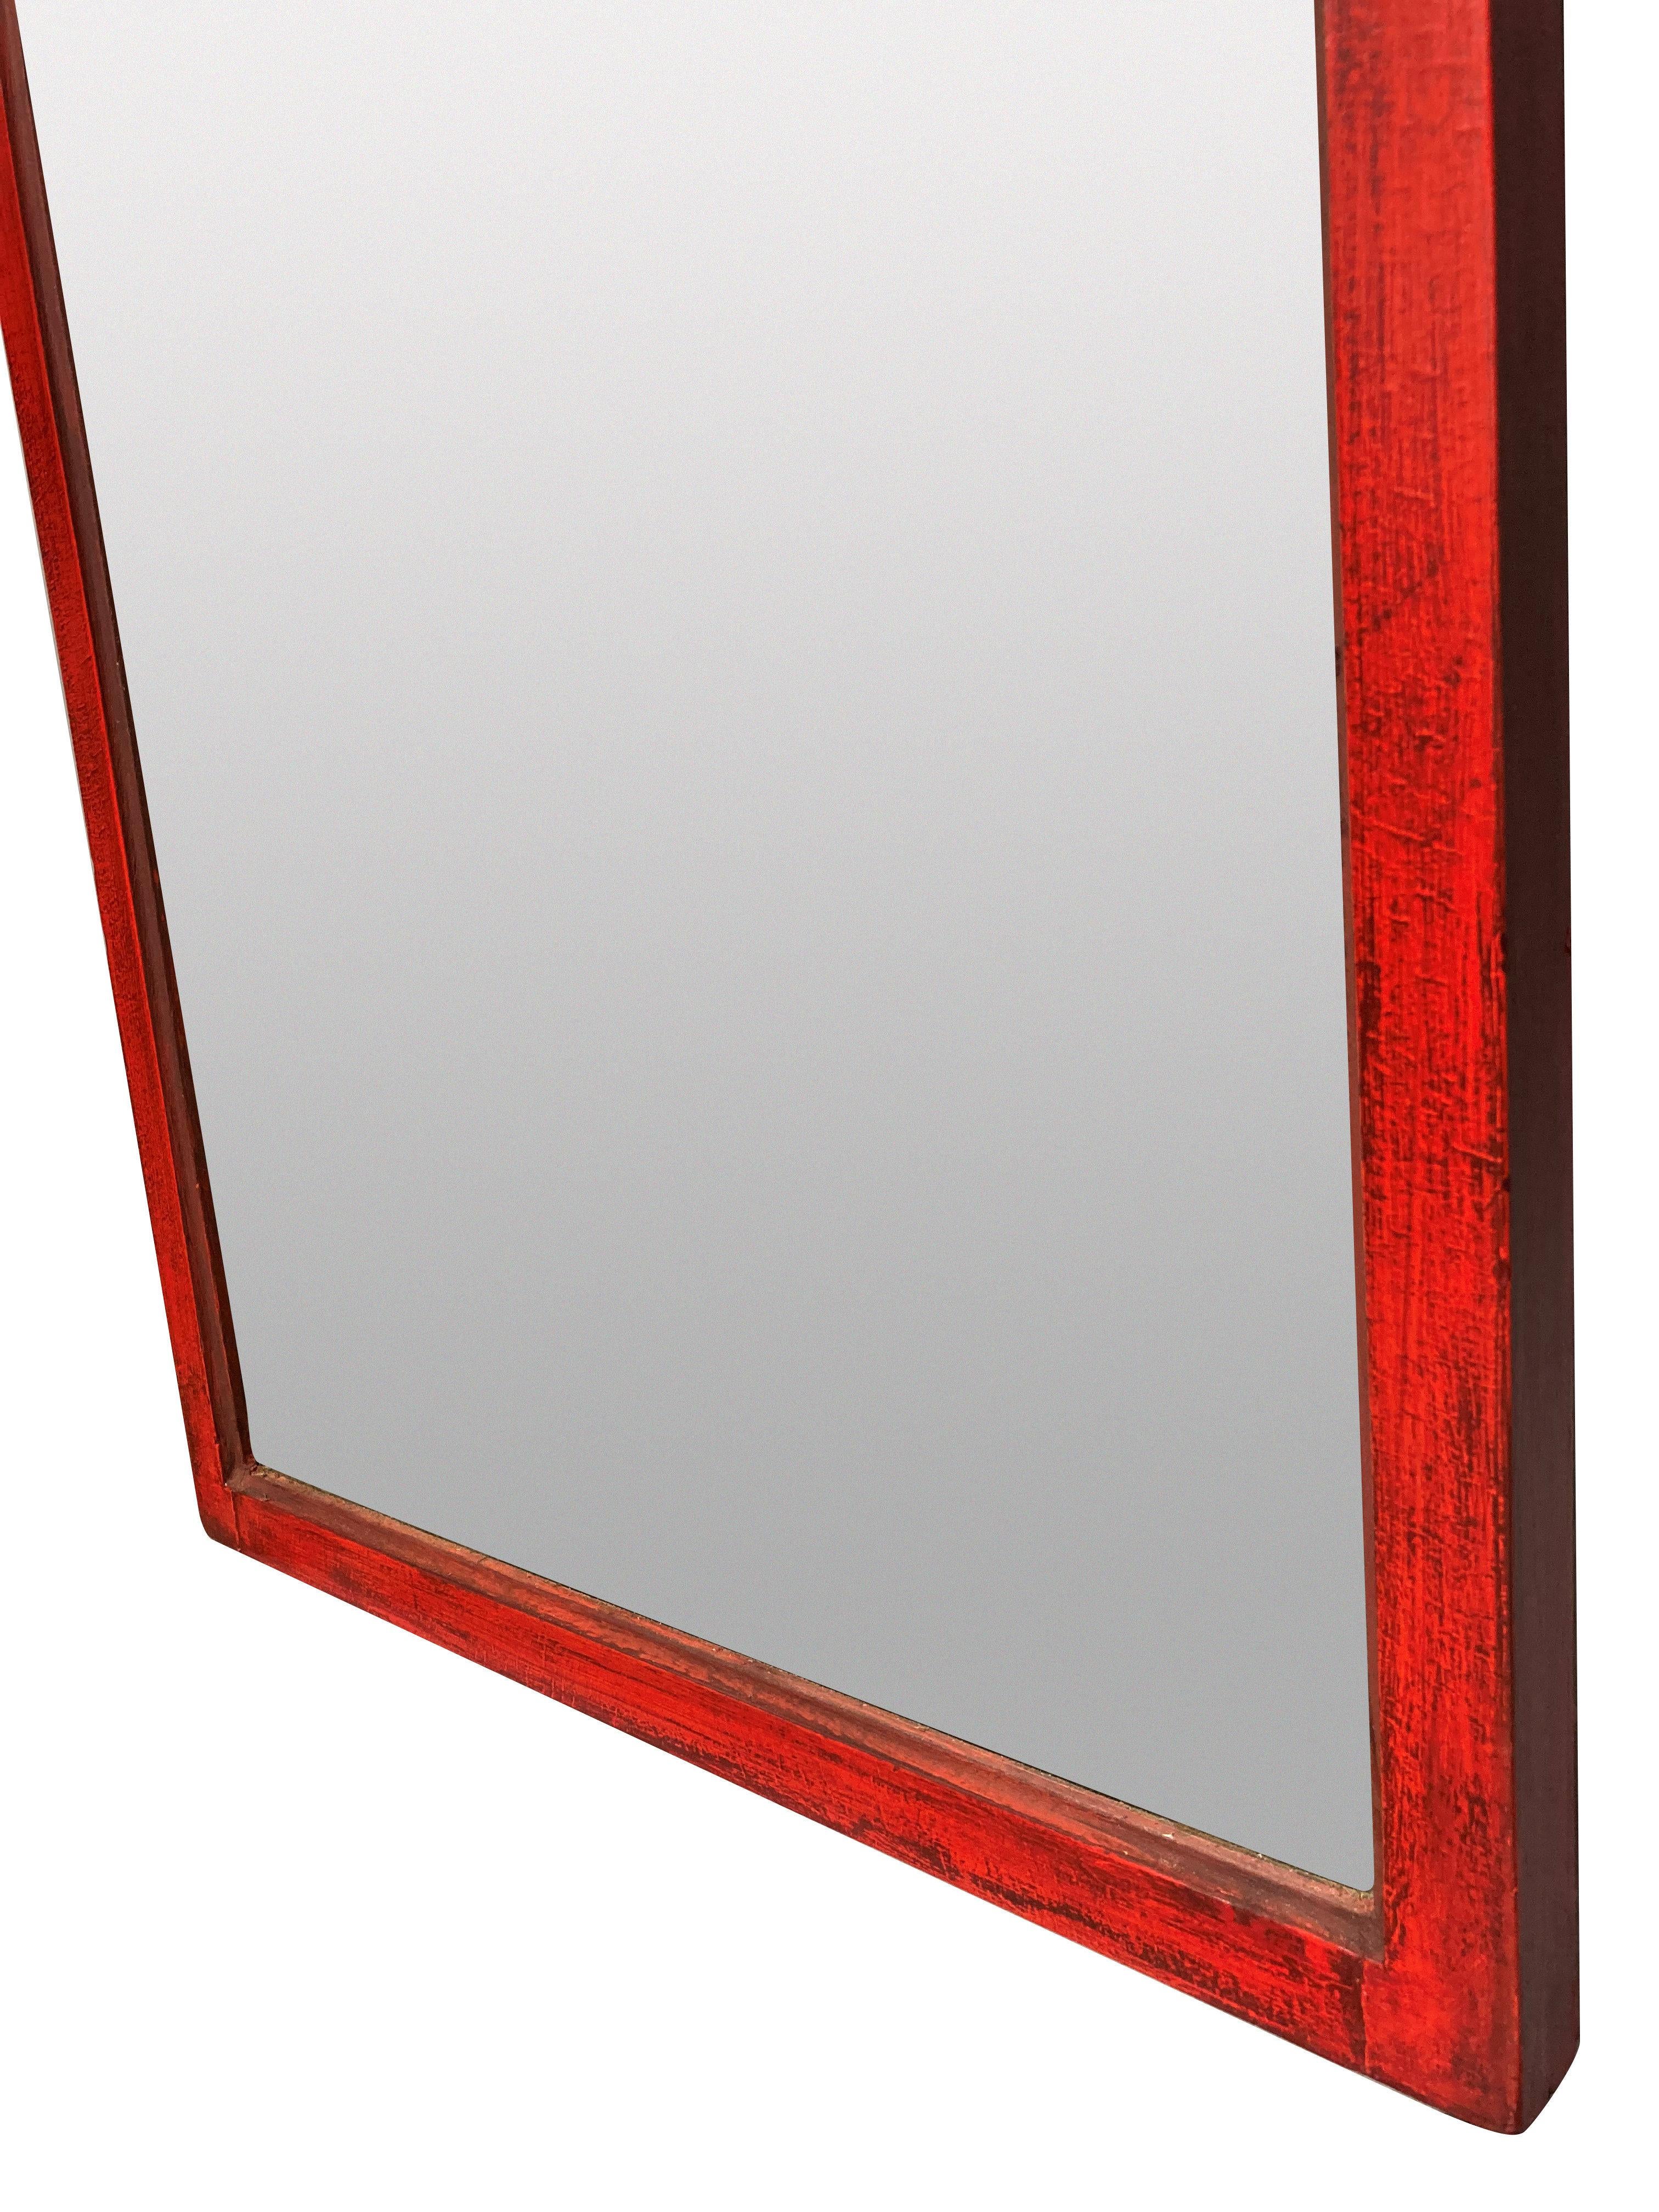 An English Queen Anne style red lacquered slender mirror, which makes up a matched pair with a seperate listing.